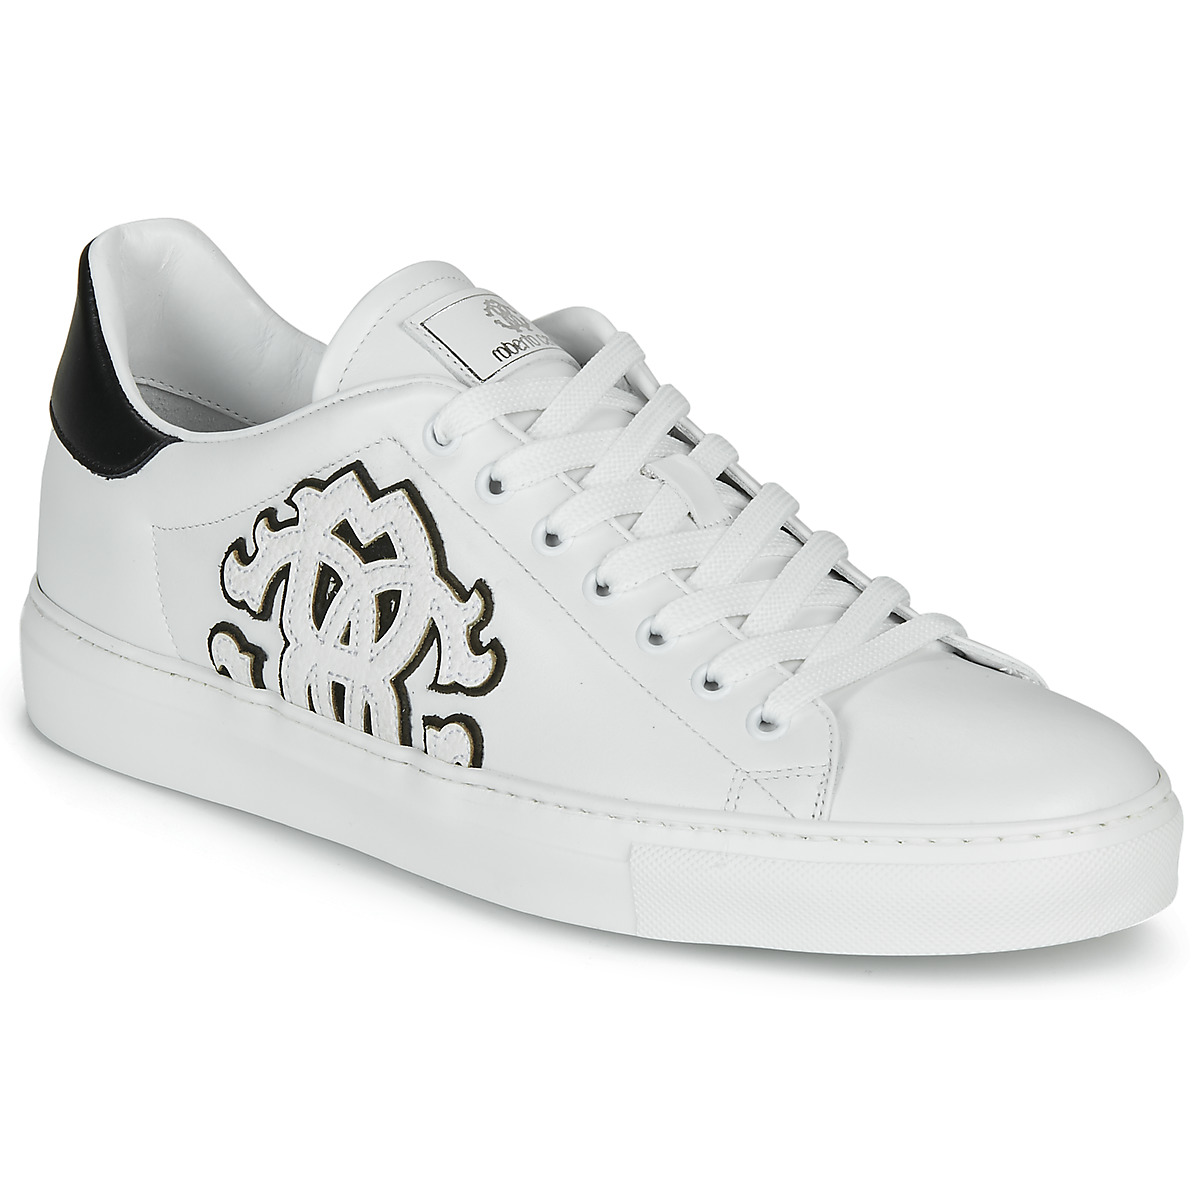 Dominant Proficiat speel piano Roberto Cavalli 1005 White / Black - Free delivery | Spartoo NET ! - Shoes  Low top trainers Men USD/$260.00